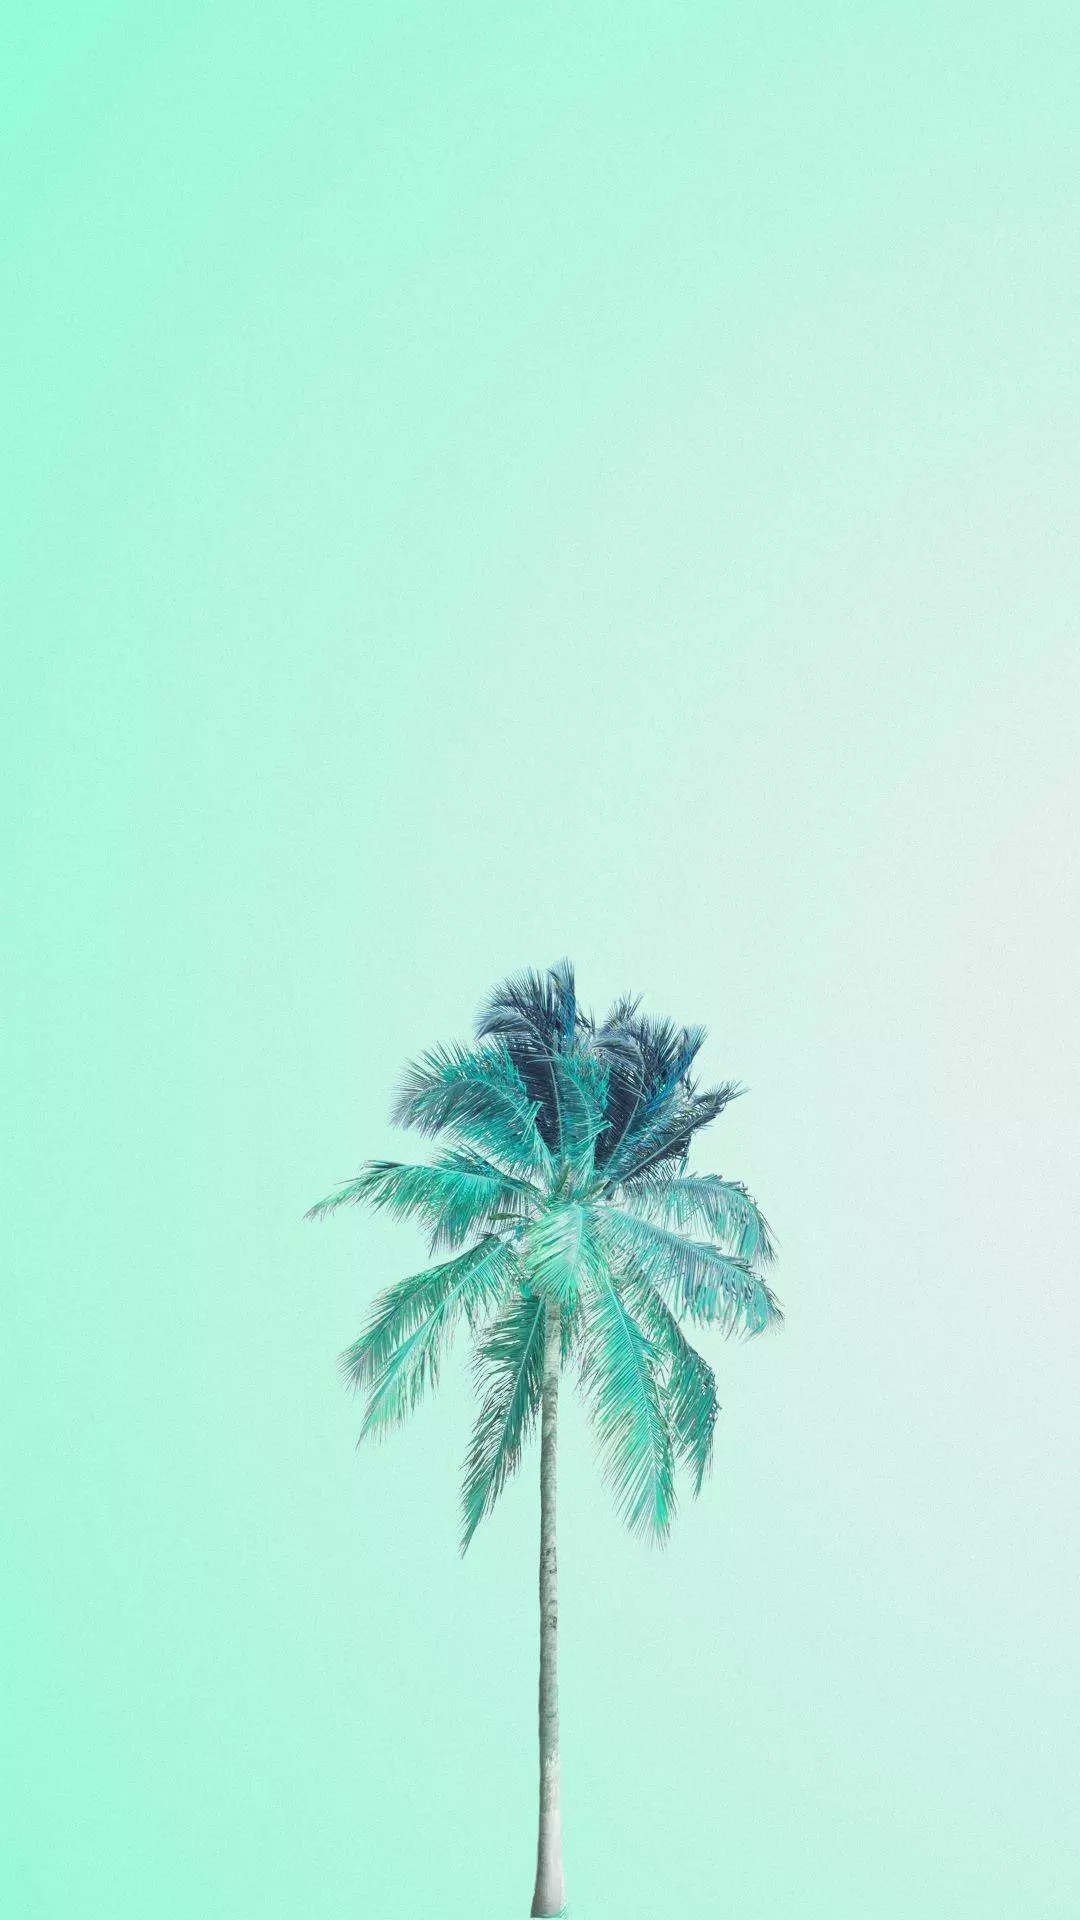 Aesthetic iPhone wallpaper with a palm tree on a blue background - Mint green